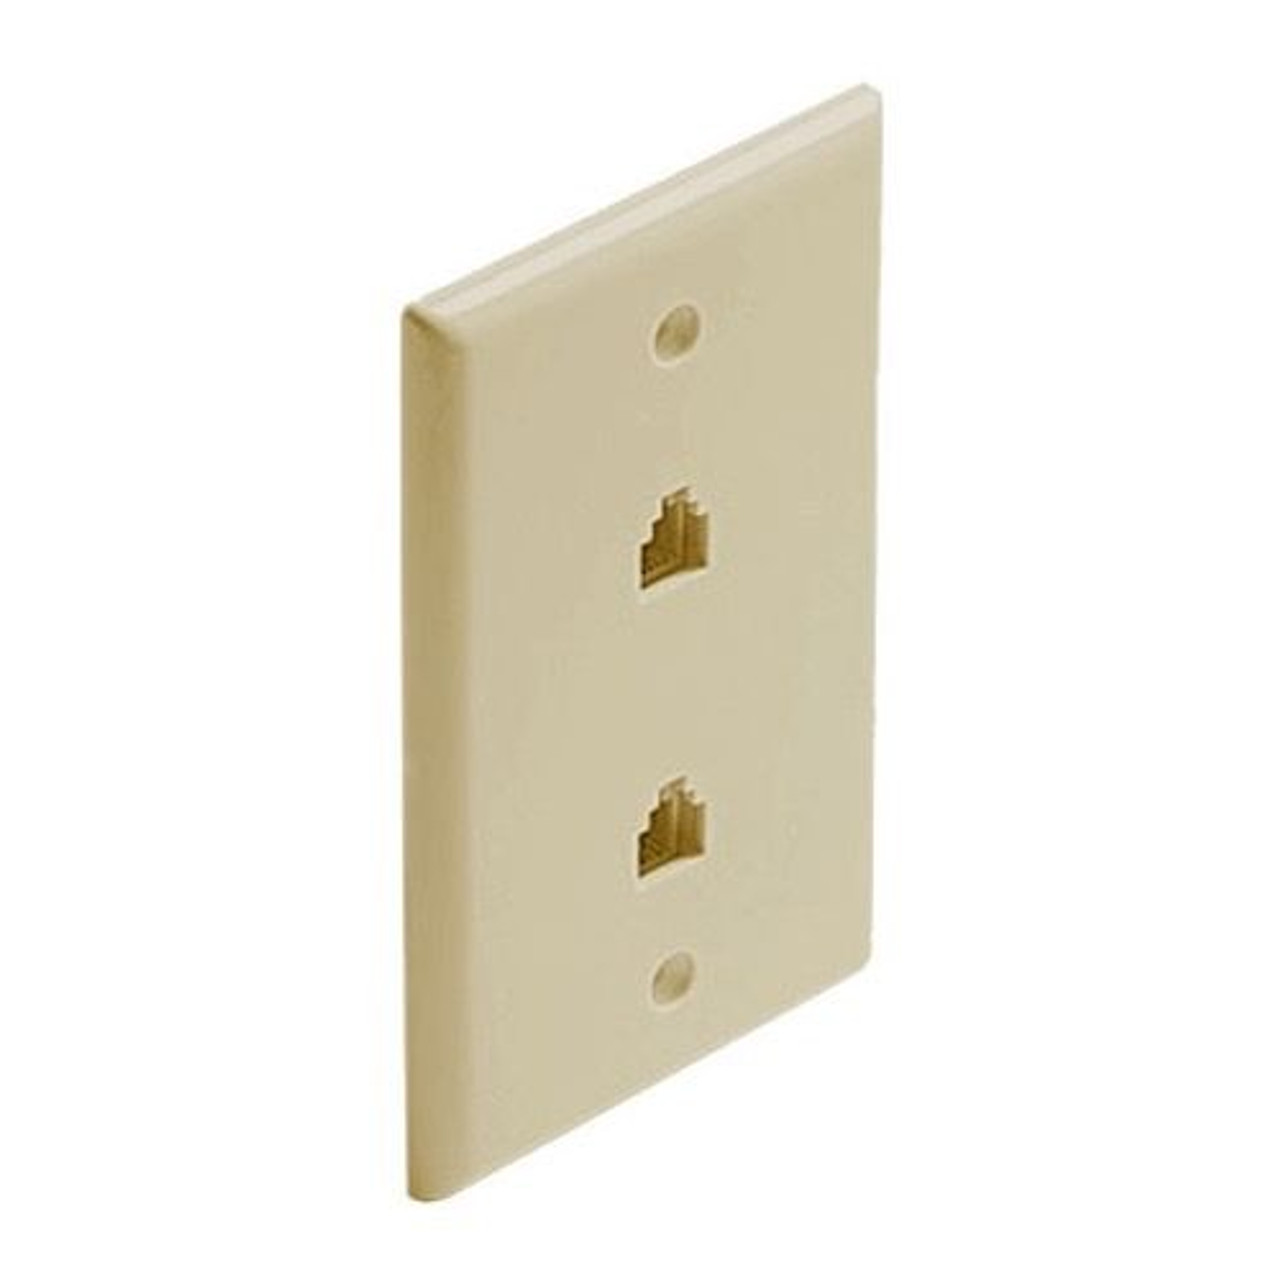 Steren 300-214IV 4-Conductor Flush Wall Plate Ivory UL 6P4C RJ11 Face Plate Dual 2-Port Telephone Wall Plate RJ-11 Jack Modular 4 Conductor Duplex Audio Signal Data Line Cord Plug, 2 Outlets, Part # 300214-IV